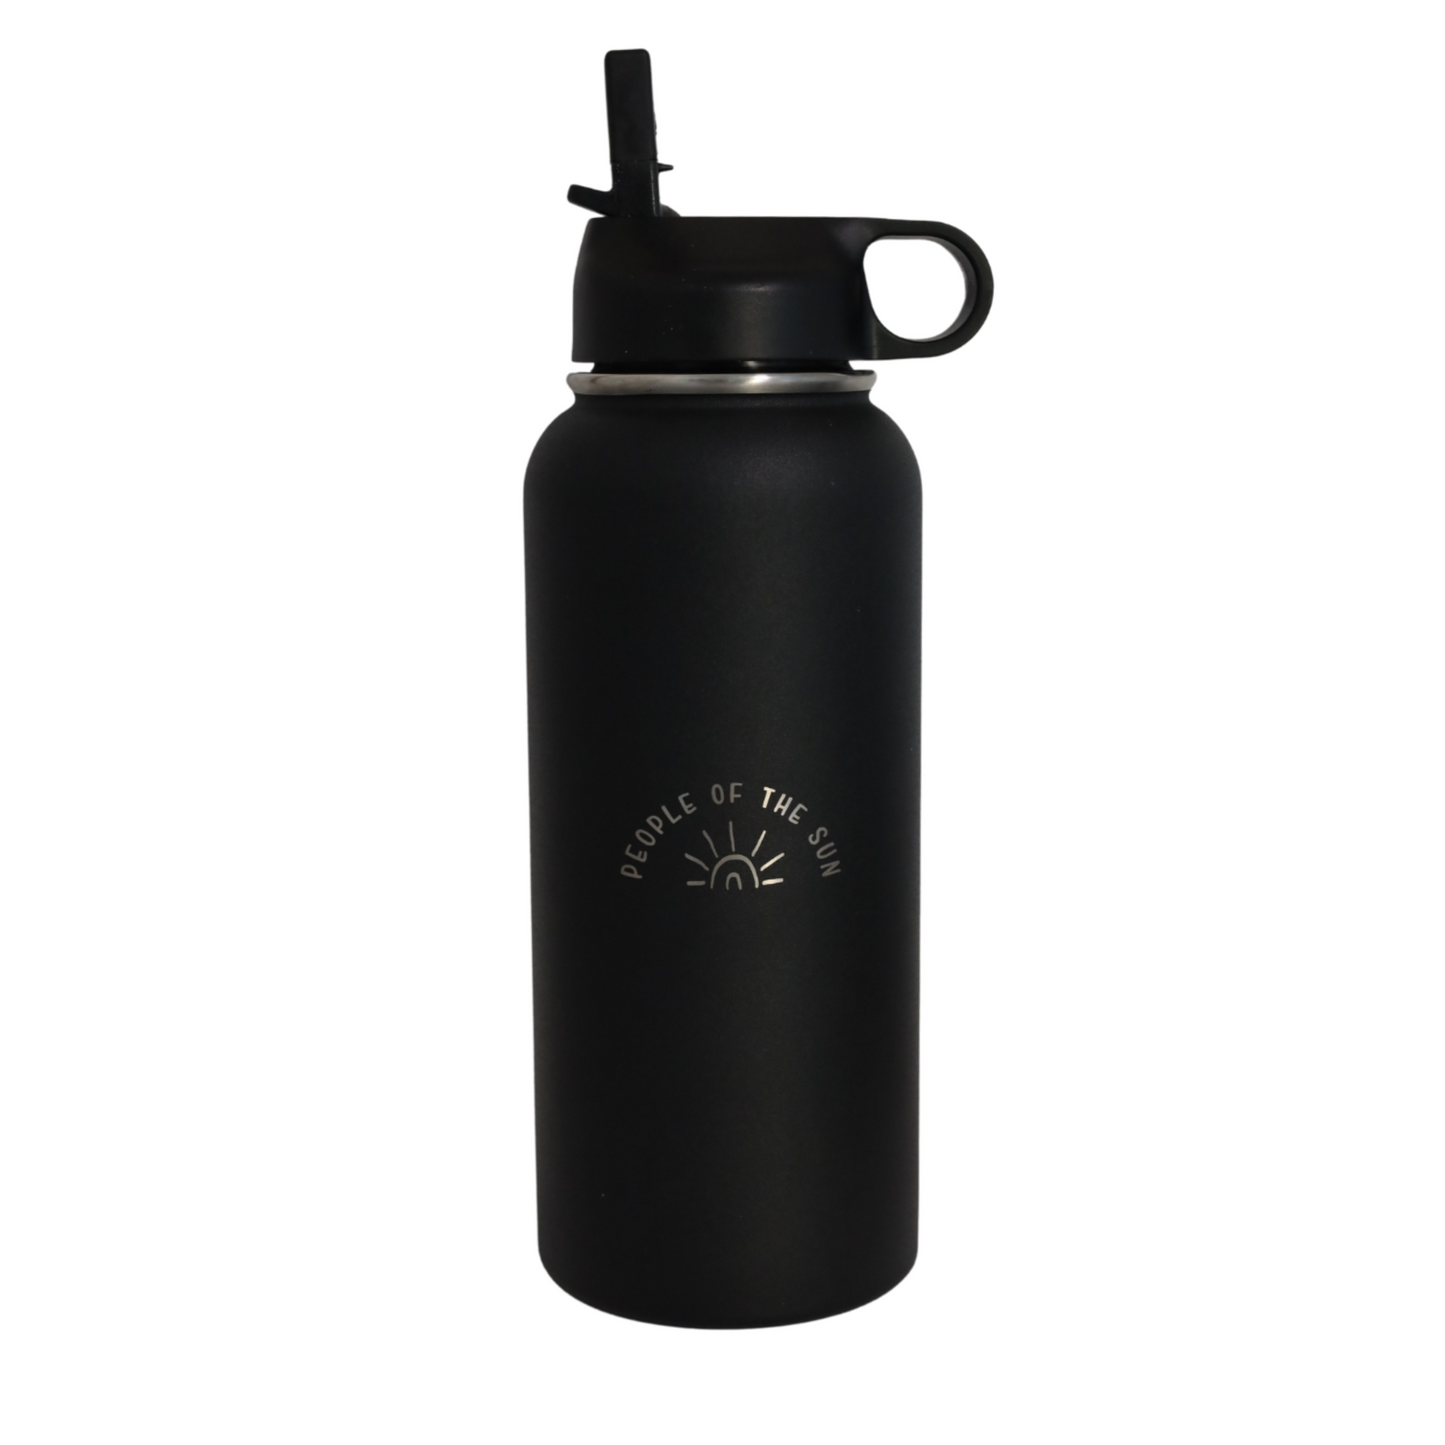 950ml Insulated Water Bottle with LOGO